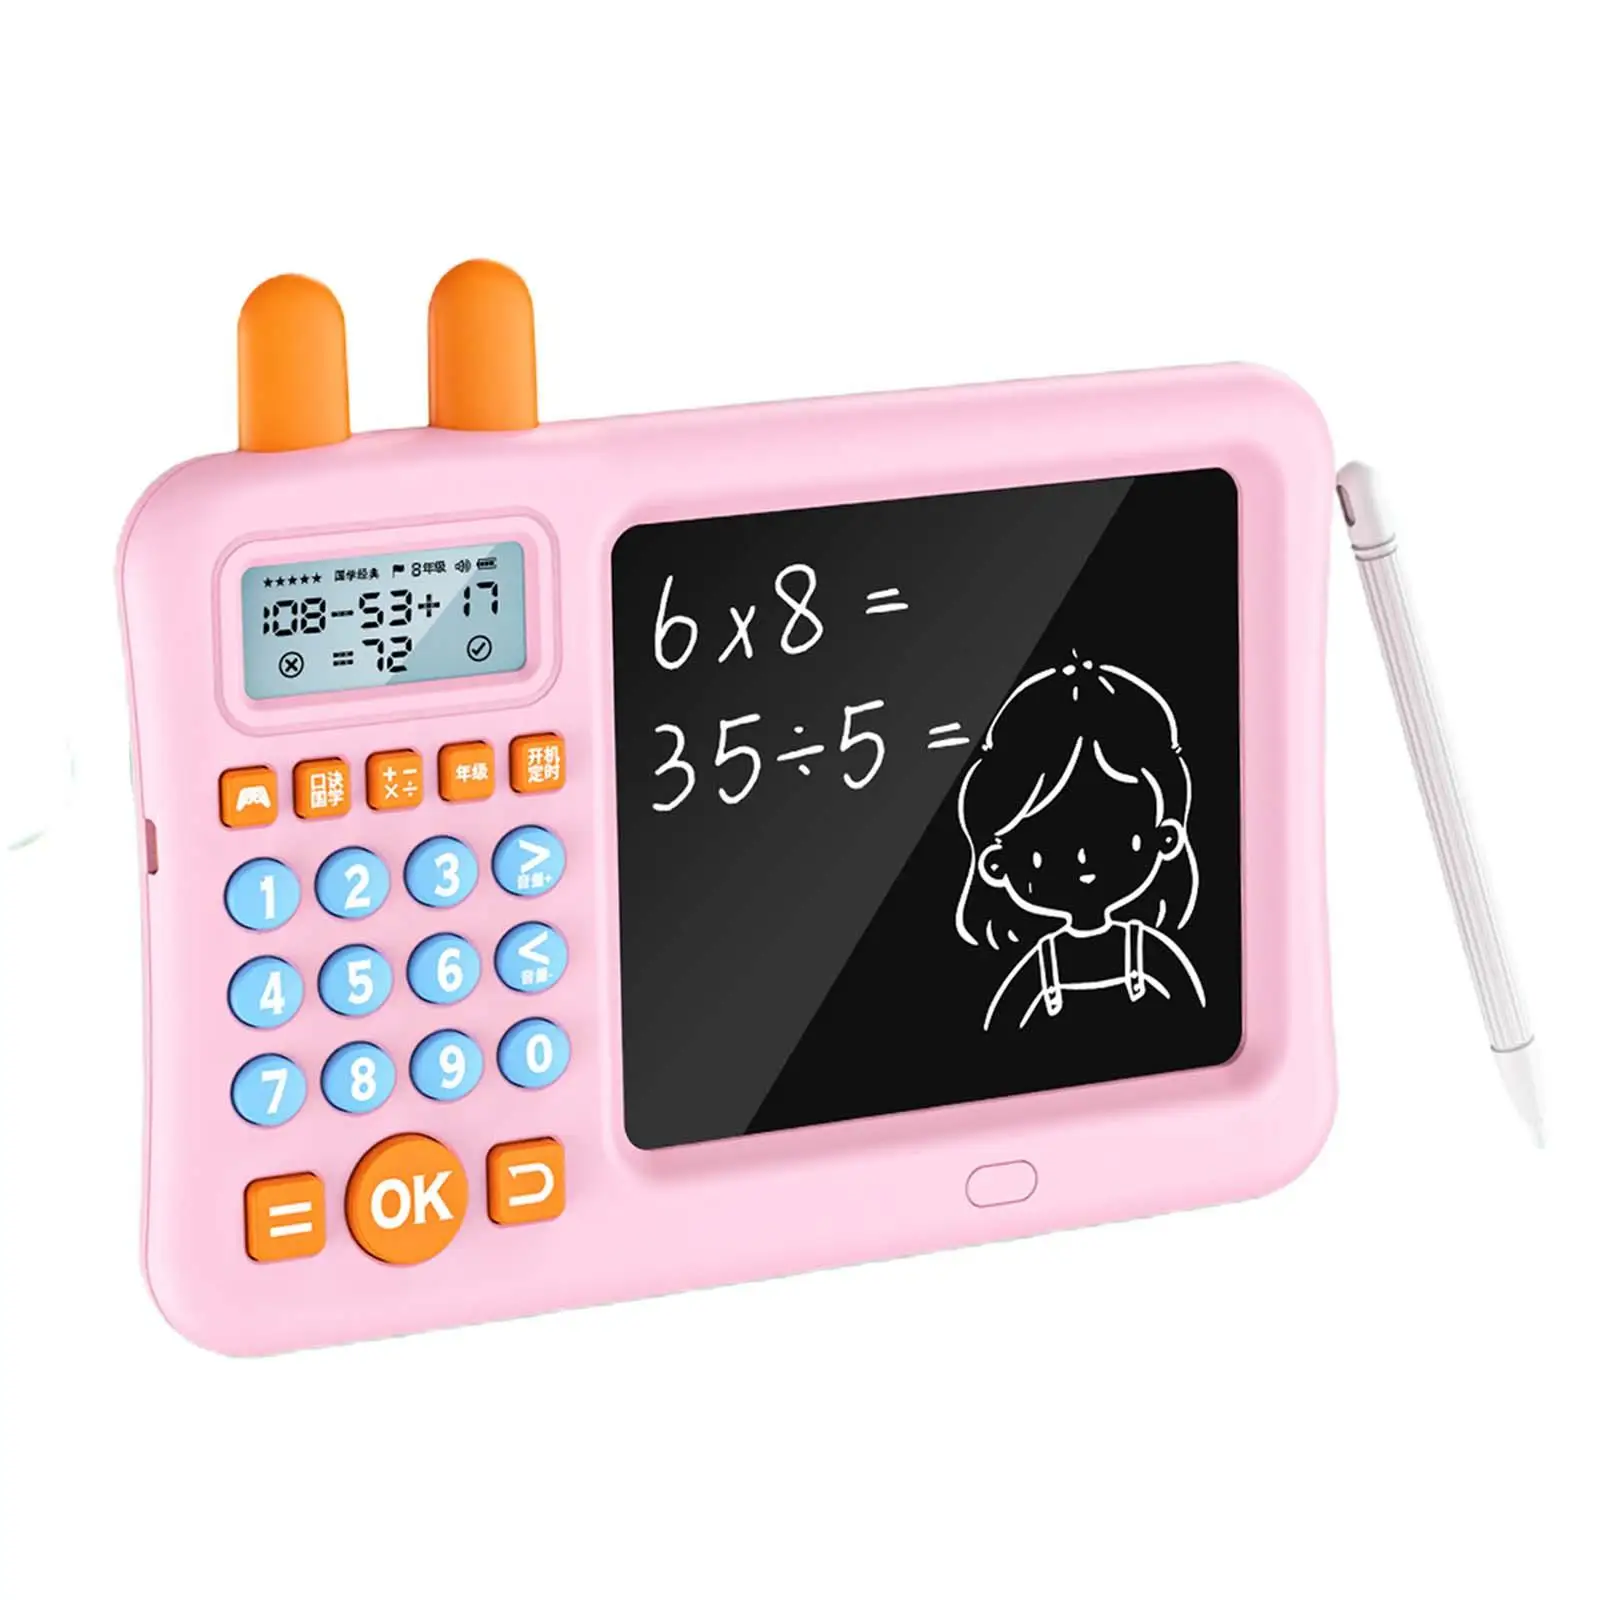 

Maths Teaching Calculator Mathematics Learning Aids Portable Electronic Math Game for Students Boys Girls Children Holiday Gifts